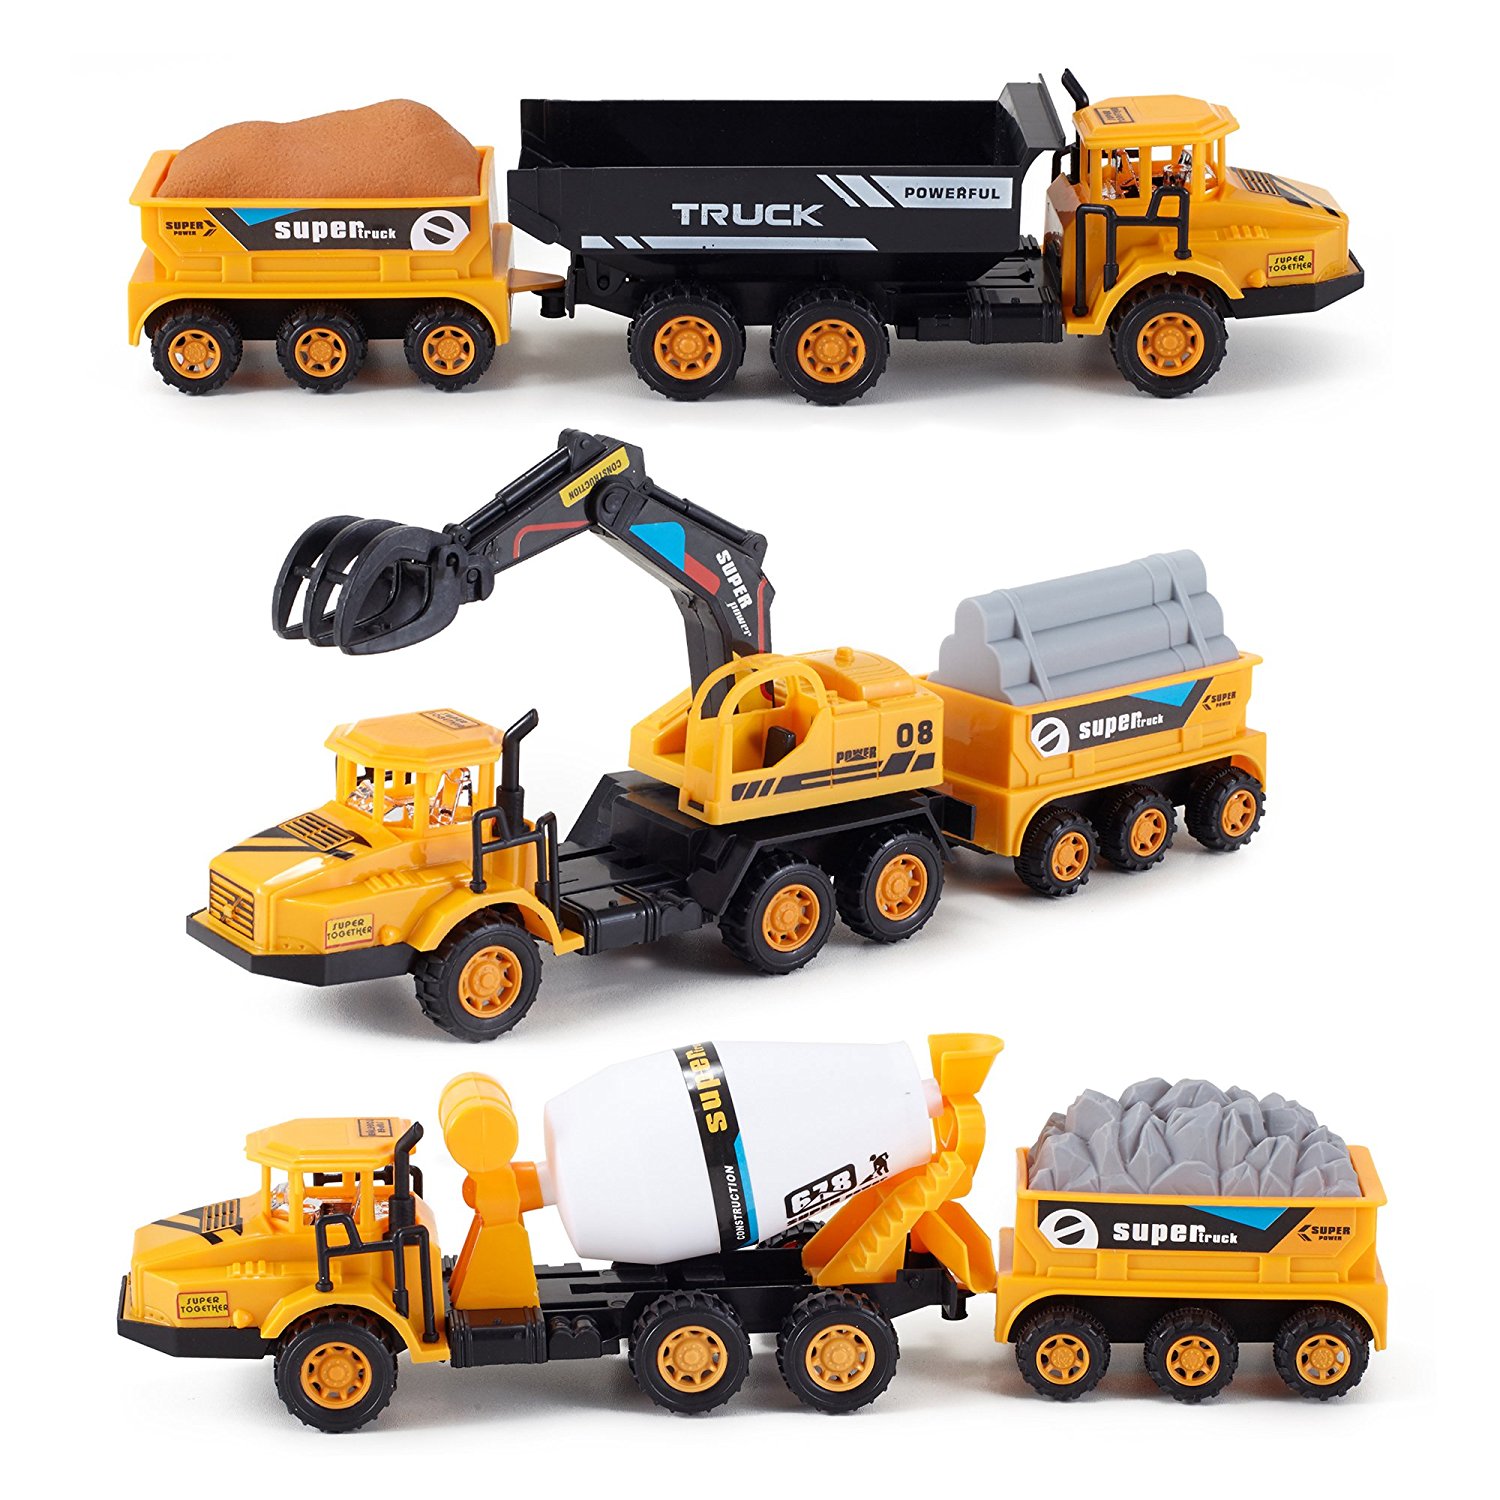 Amazon.com: Liberty Imports Set of 3 Deluxe Construction Toy ...